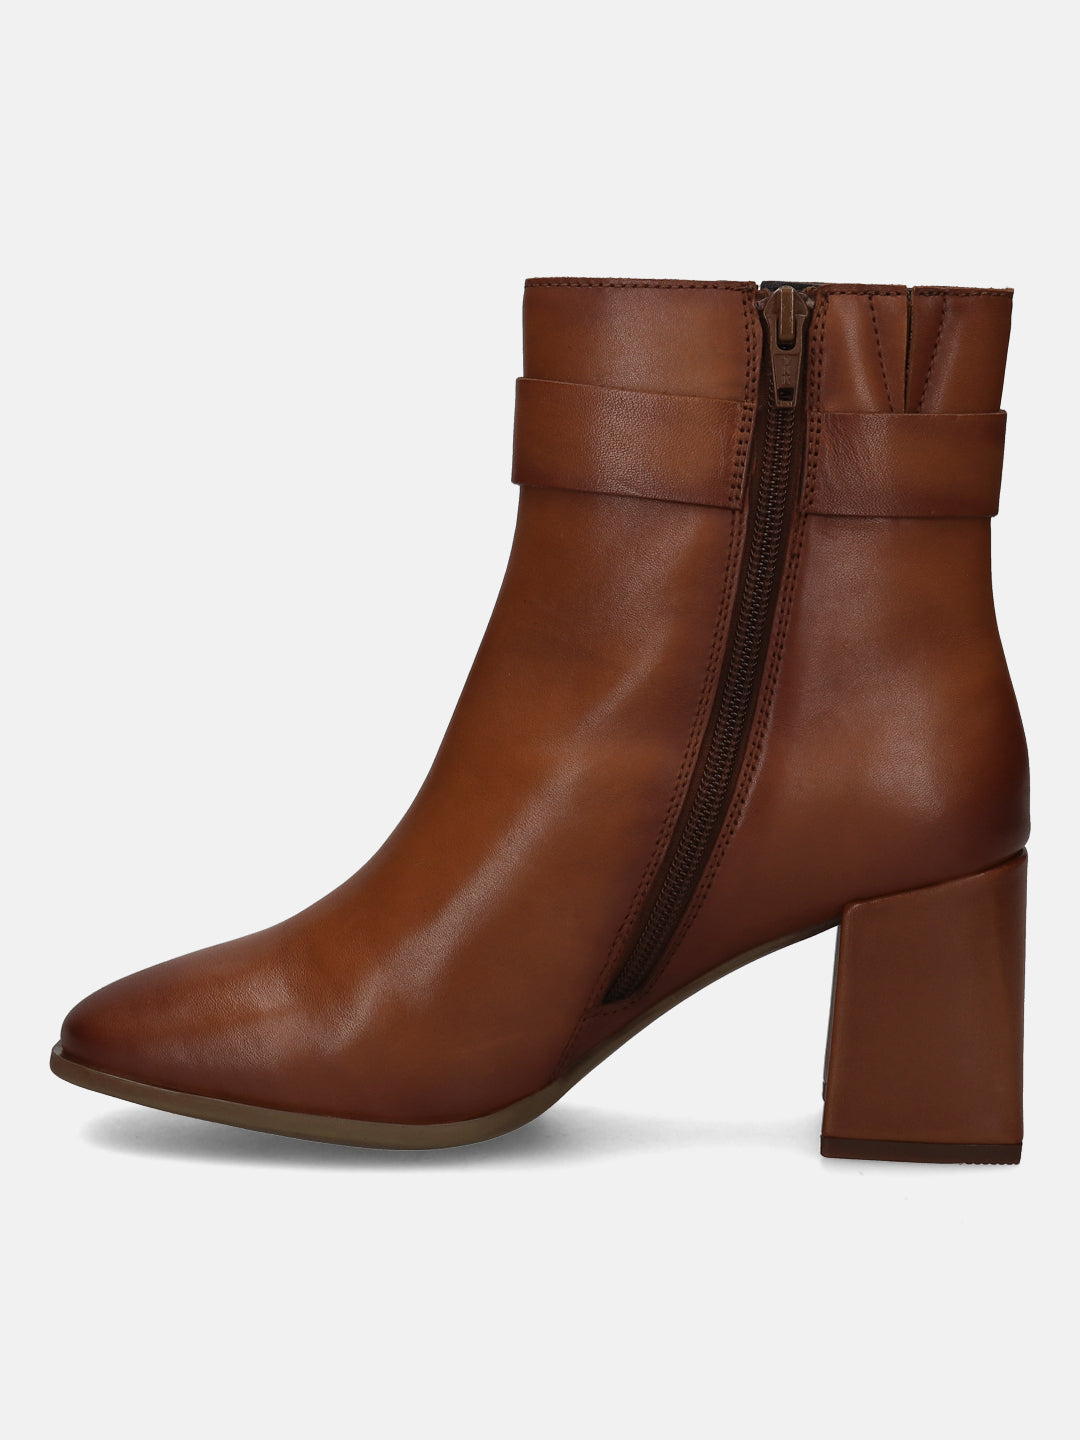 Crema Cognac Leather Ankle Boots